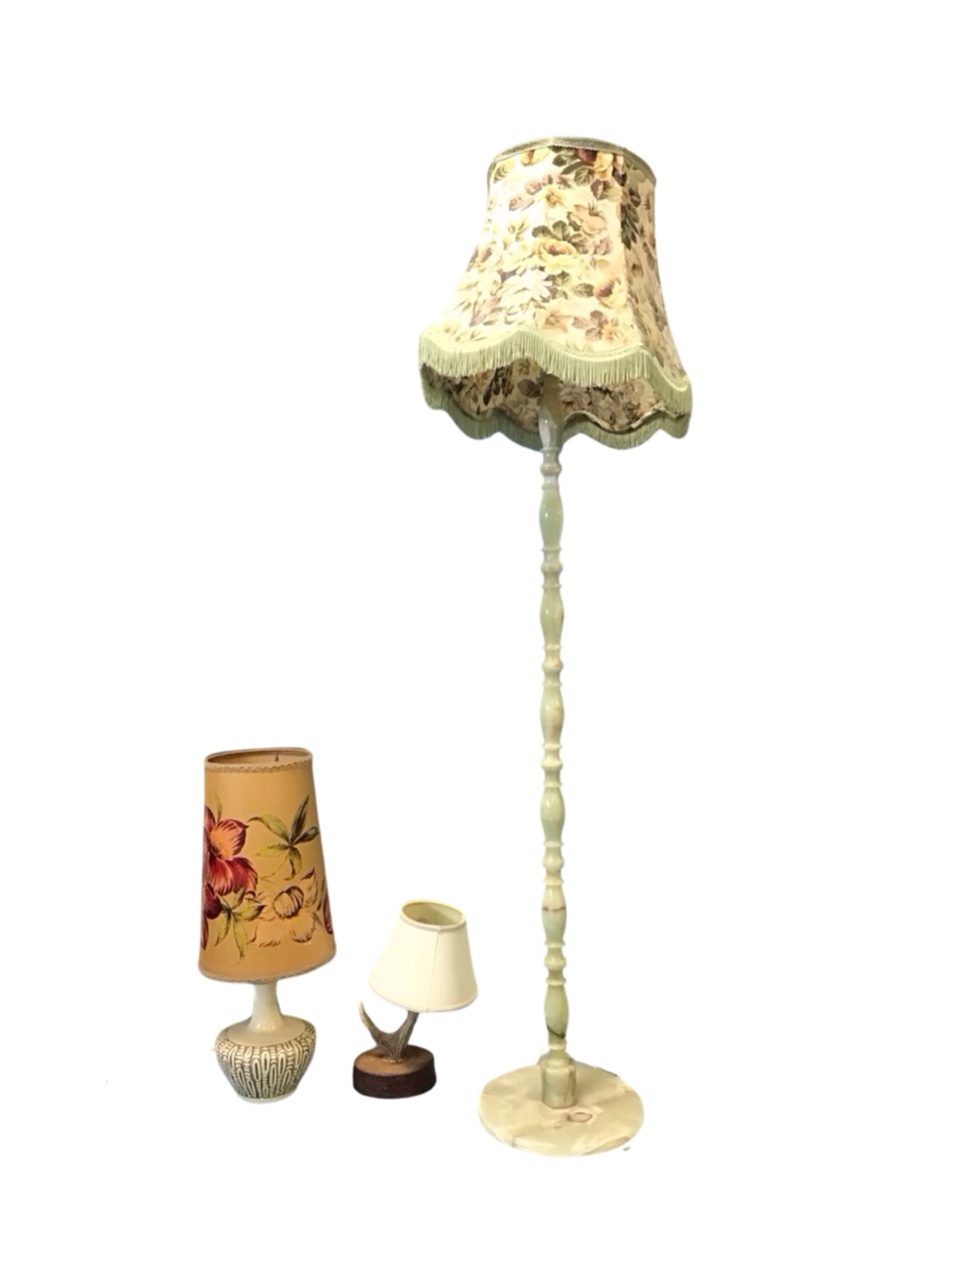 An onyx standard lamp, the reel-turned column on a circular base, with floral fabric shade - 68